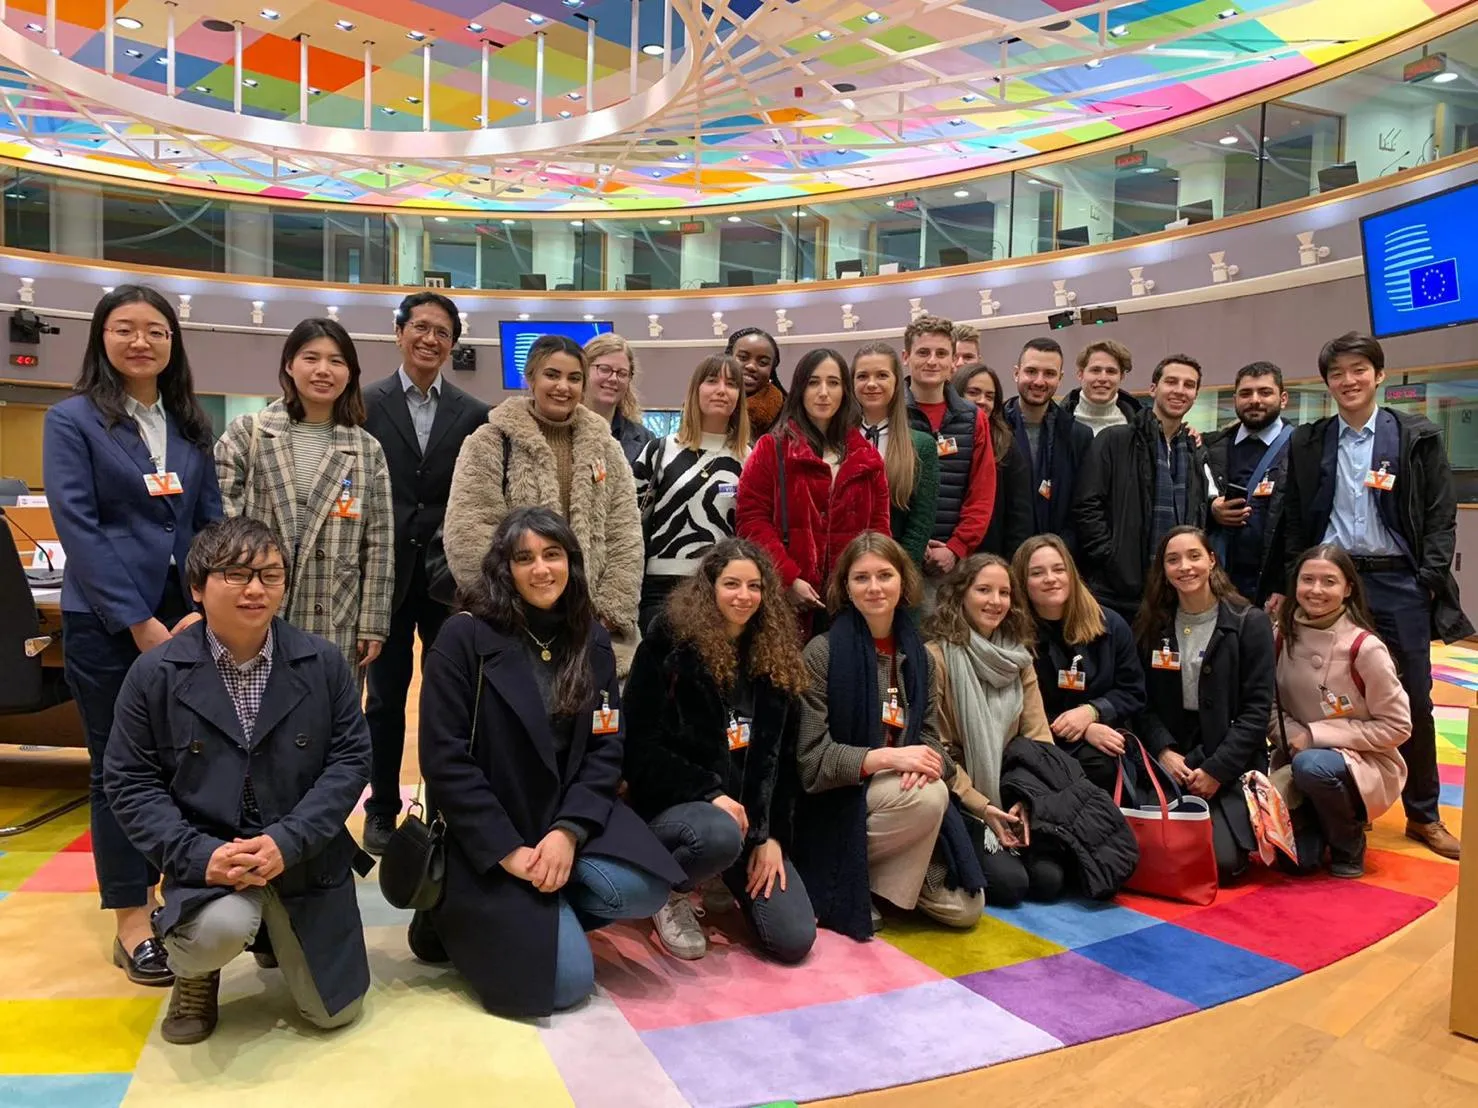 ESKA students enjoyed a trip to the EU in Brussels